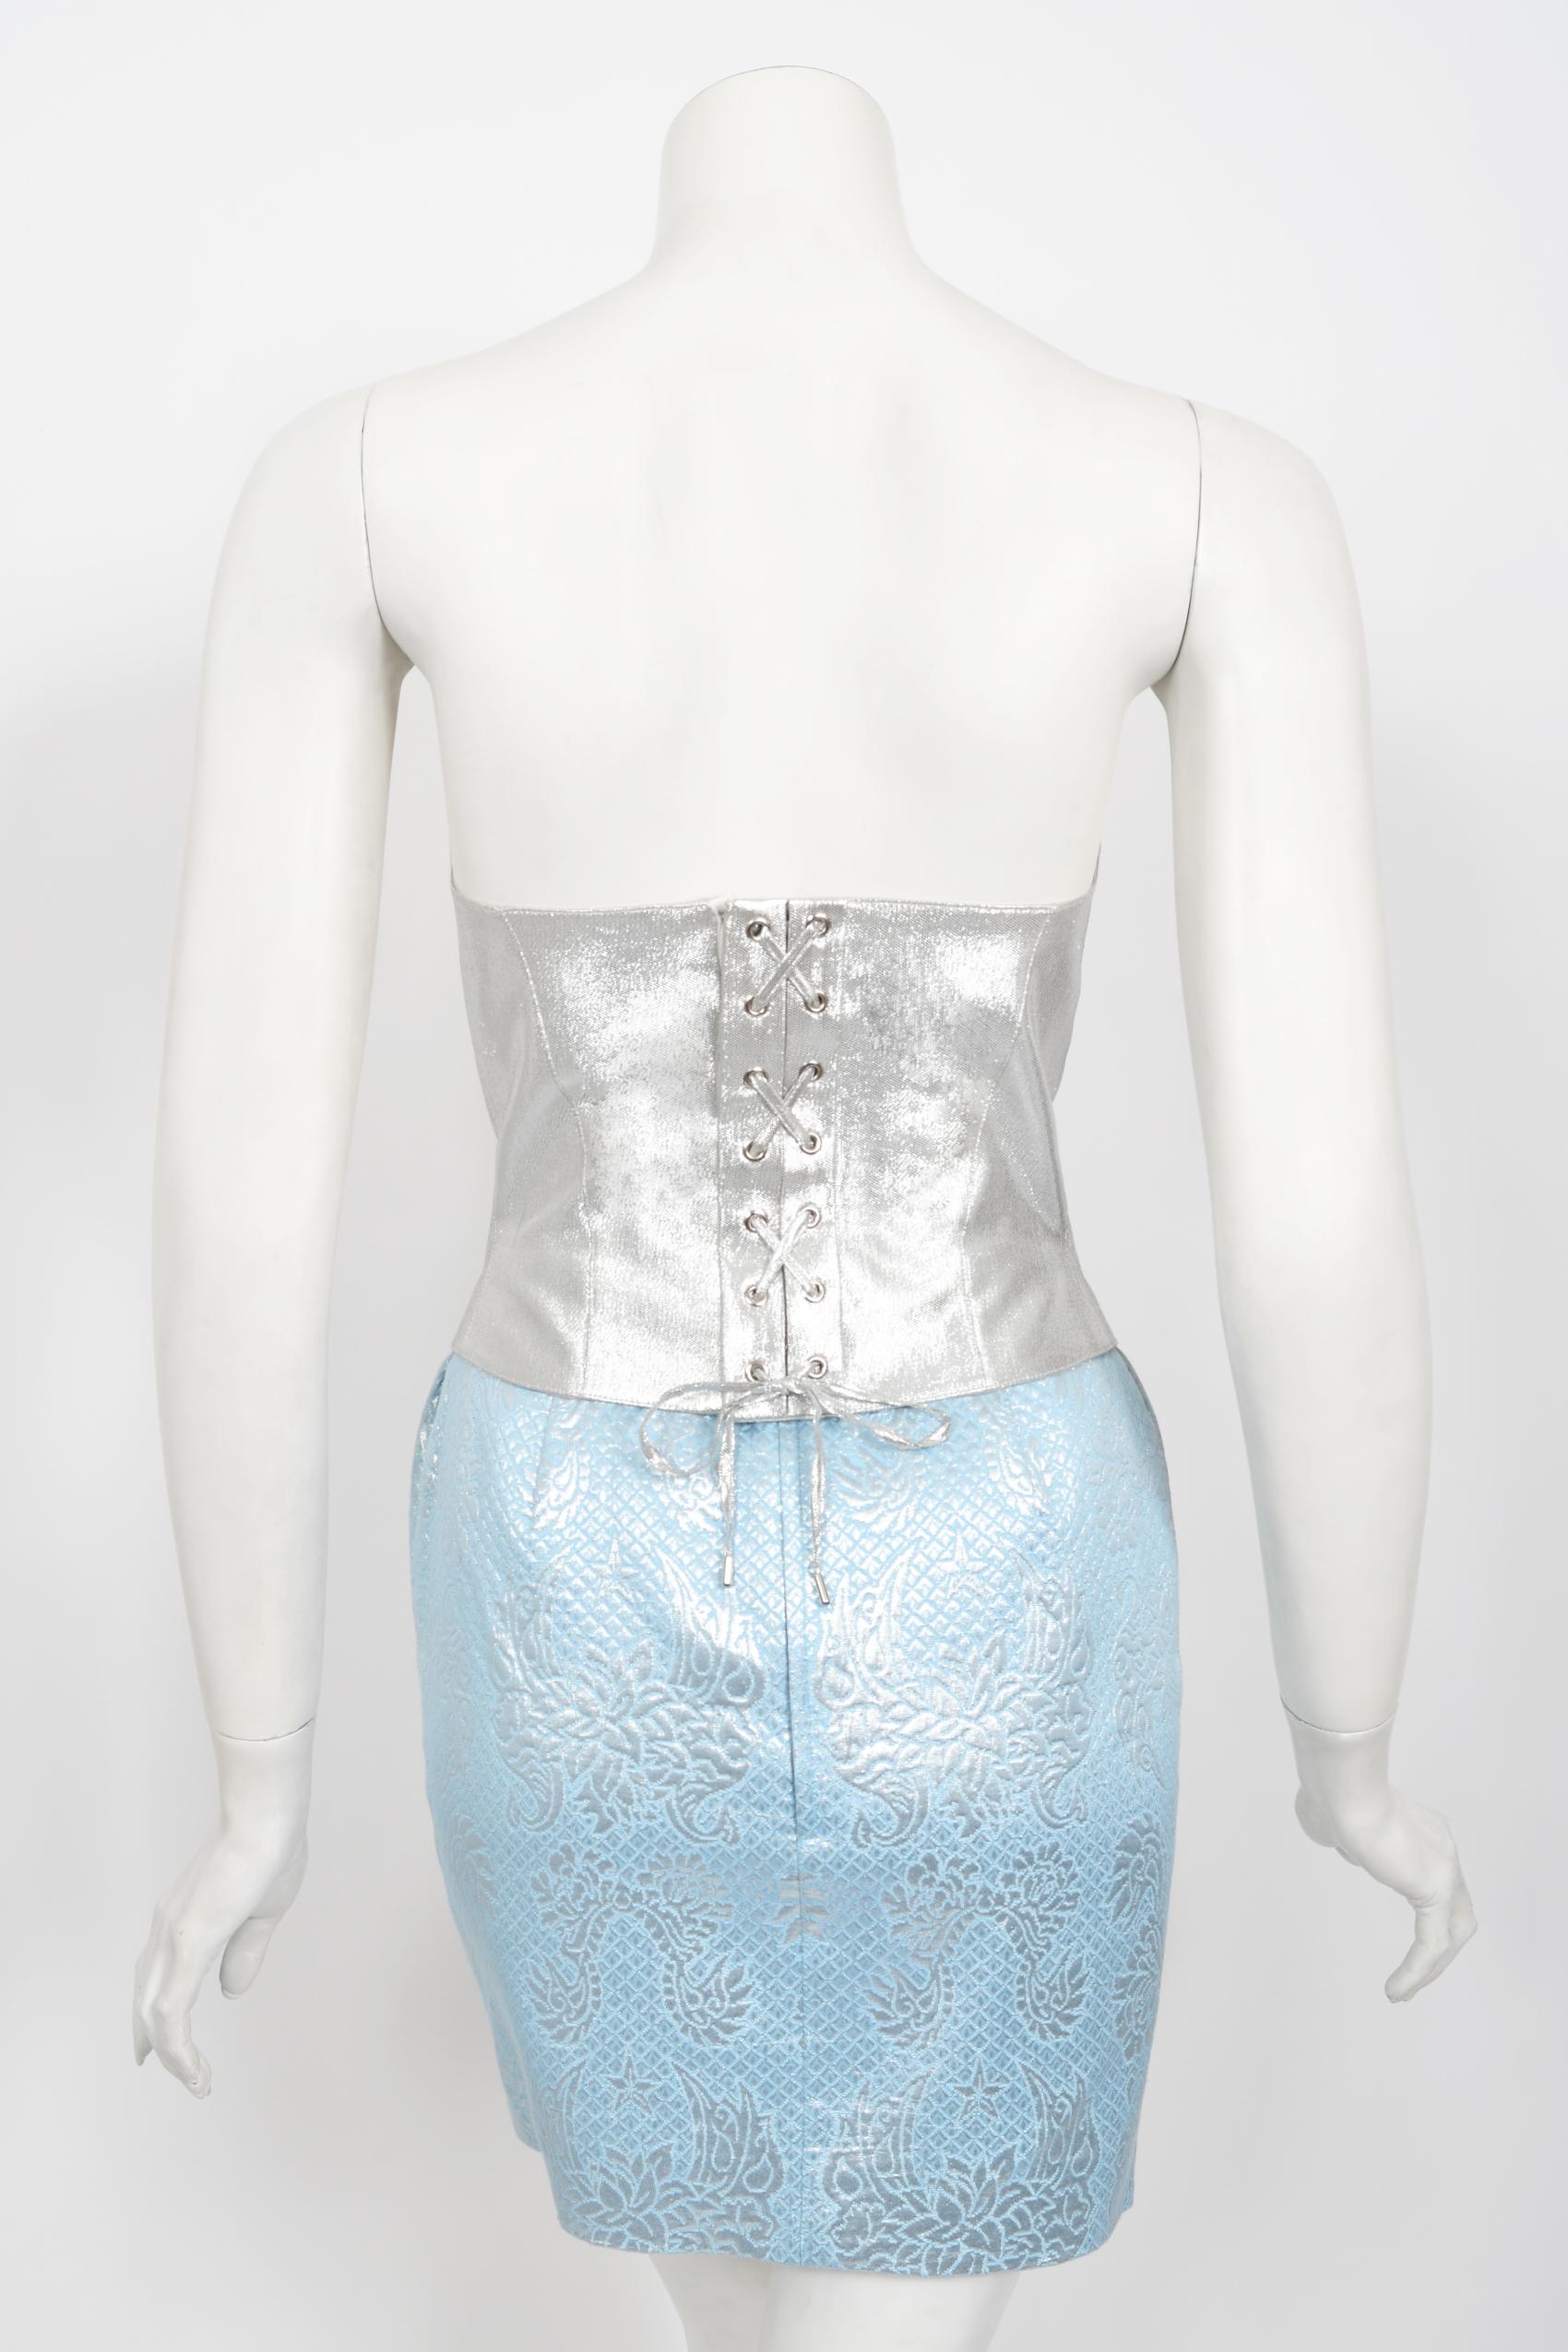 Iconic 1992 Thierry Mugler Couture Metallic Silver Blue Bustier Mini Skirt Suit For Sale 14